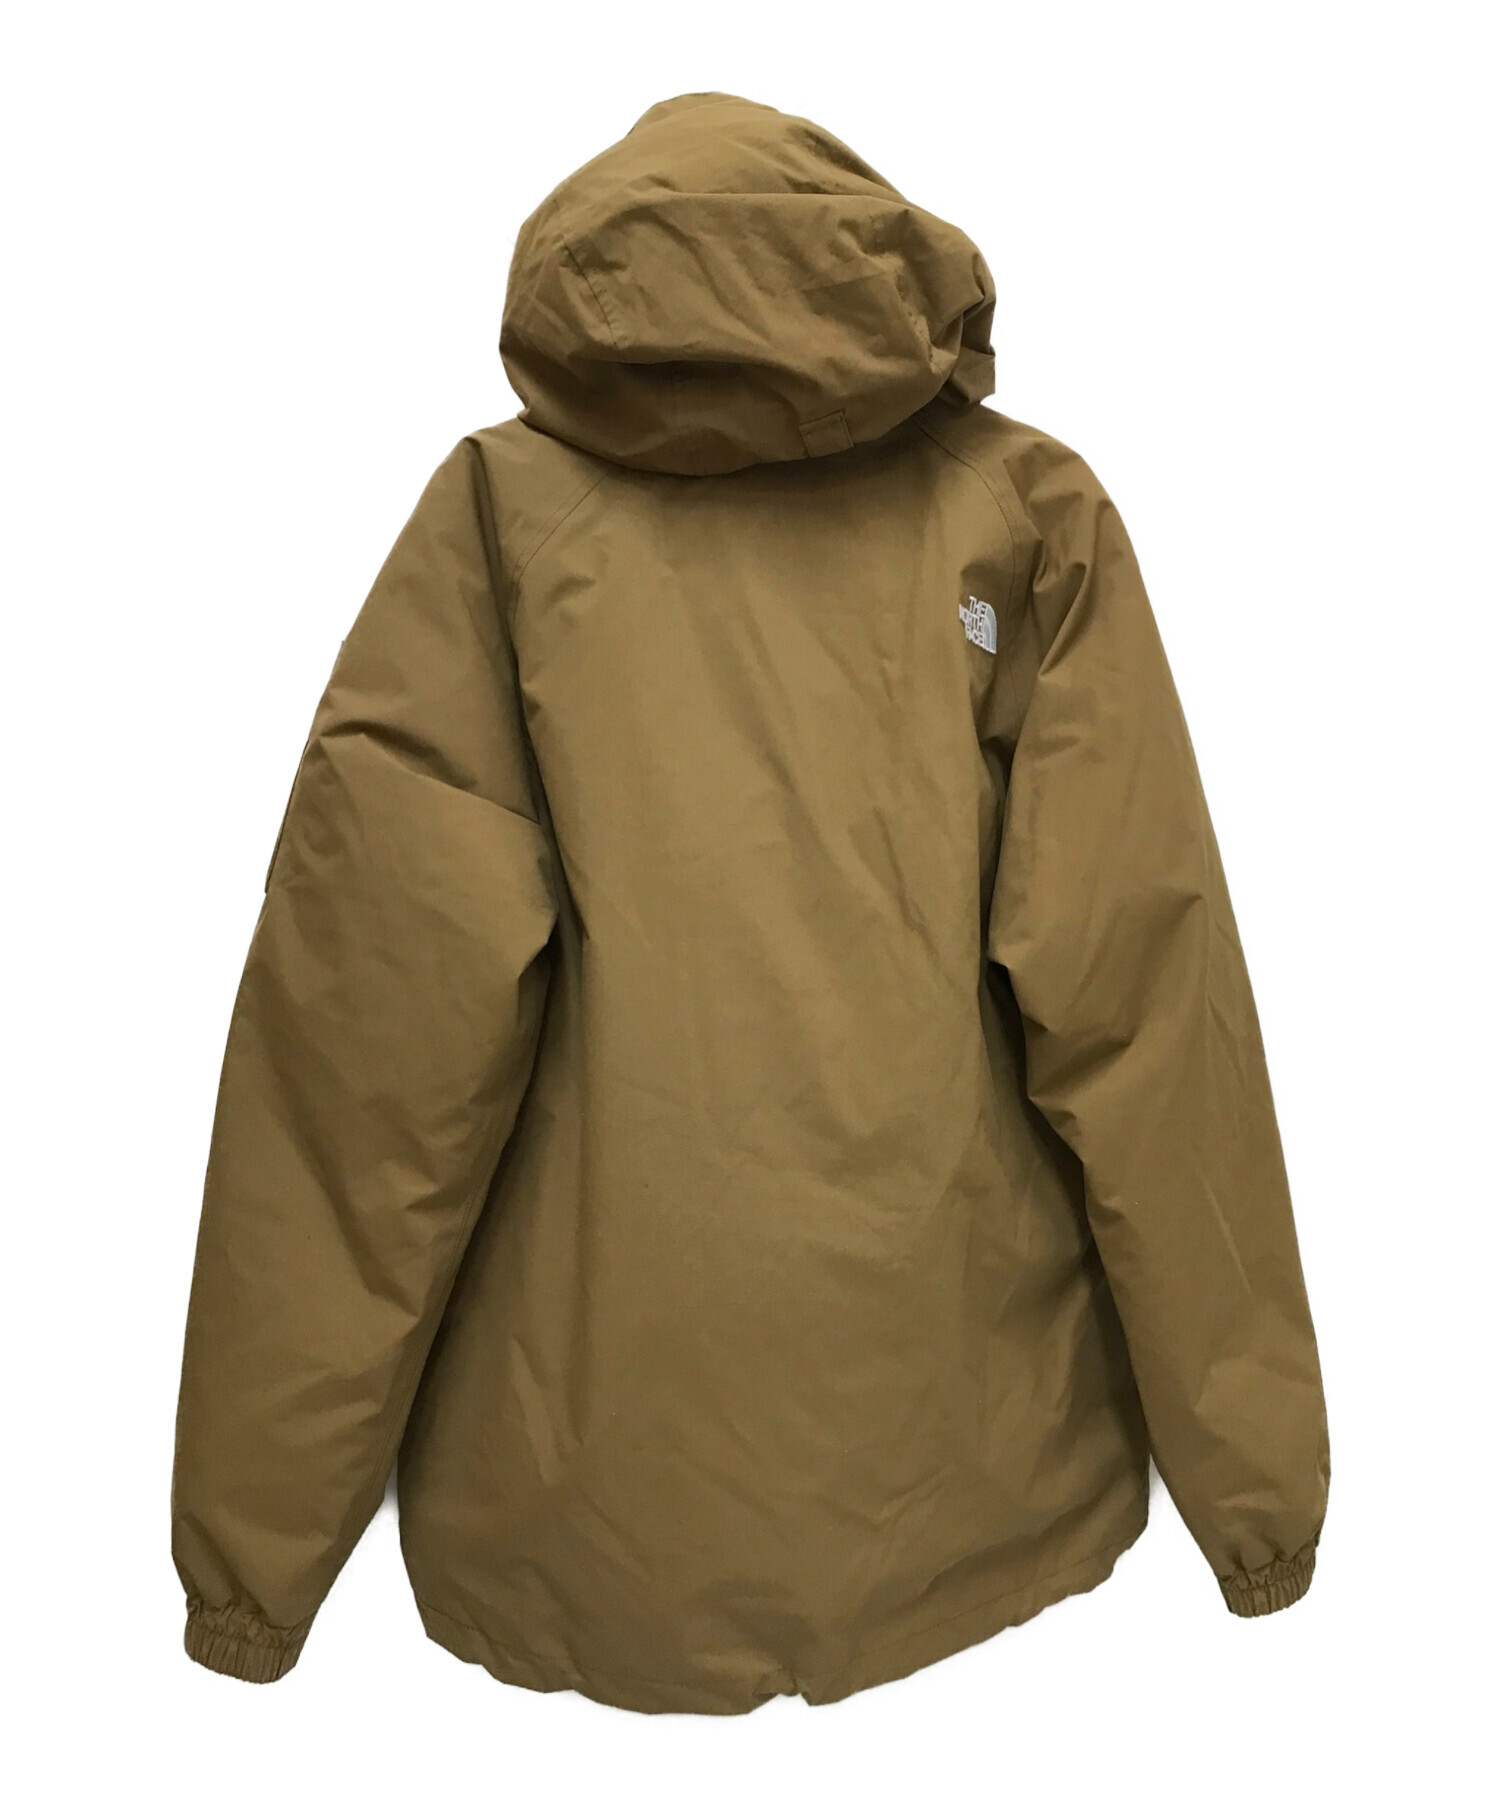 THE NORTH FACE (ザ ノース フェイス) Grace Triclimate Jacket サイズ:L